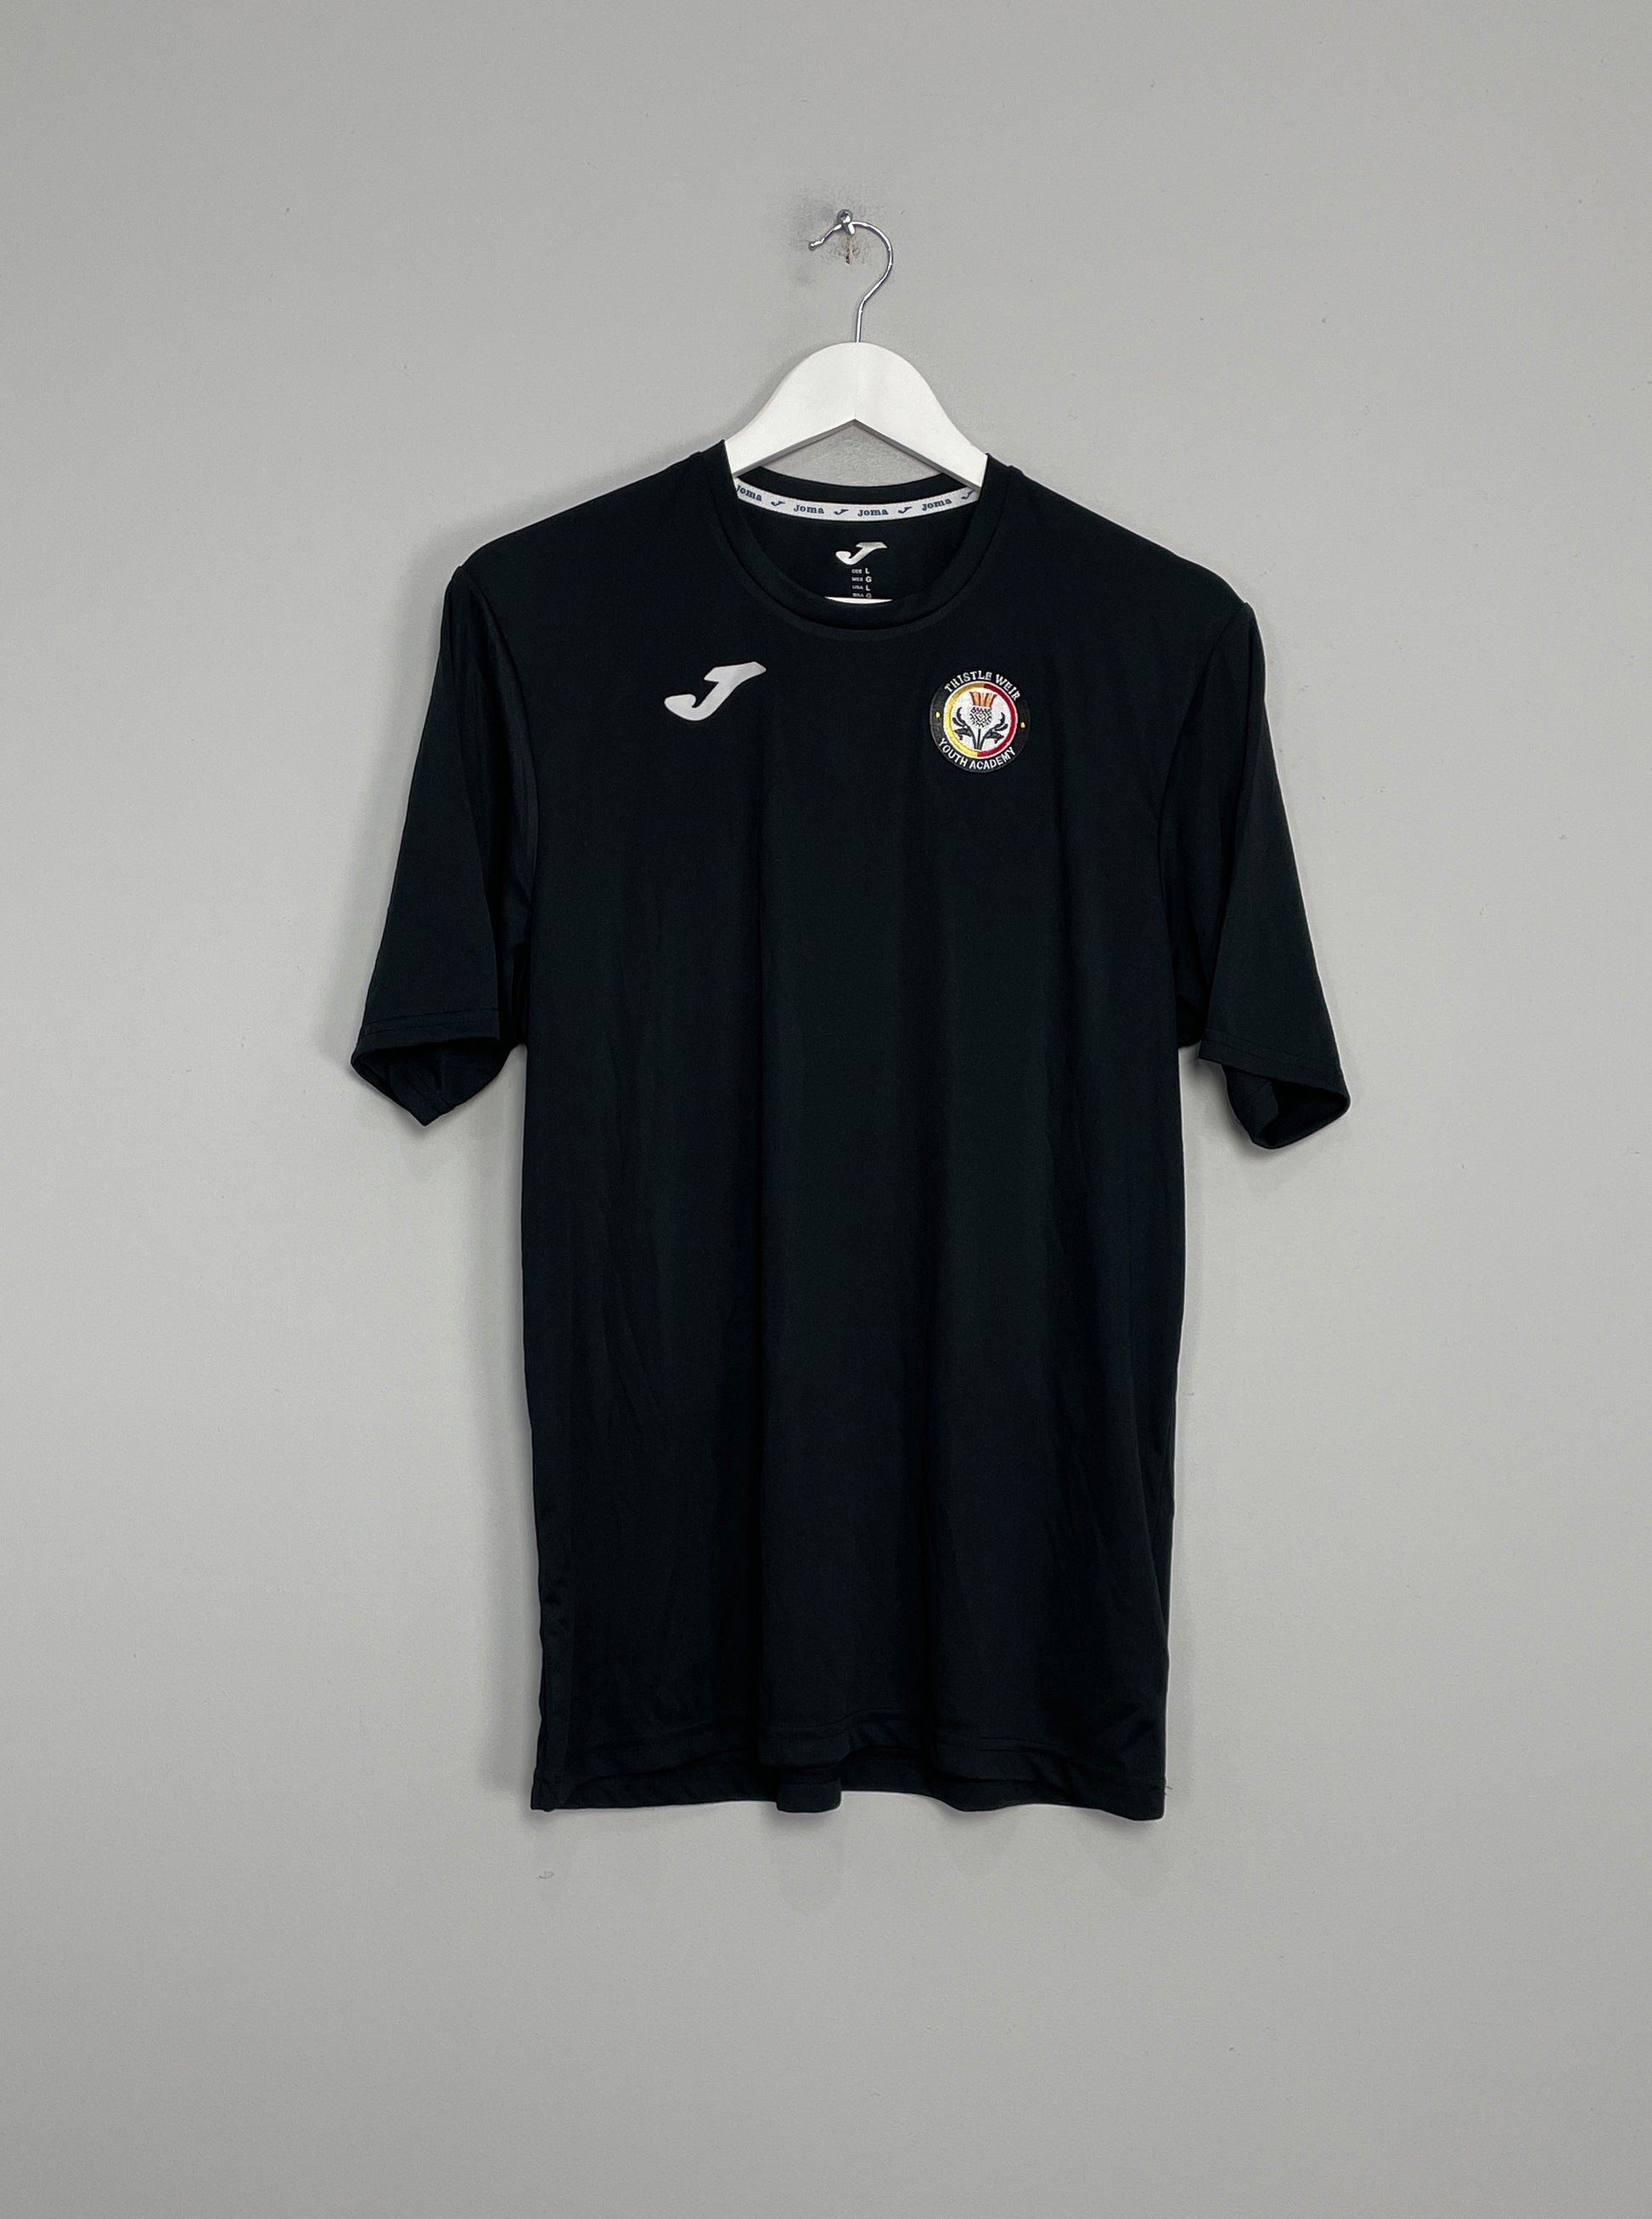 Image of the Thistle Weir shirt from the 2018/19 season